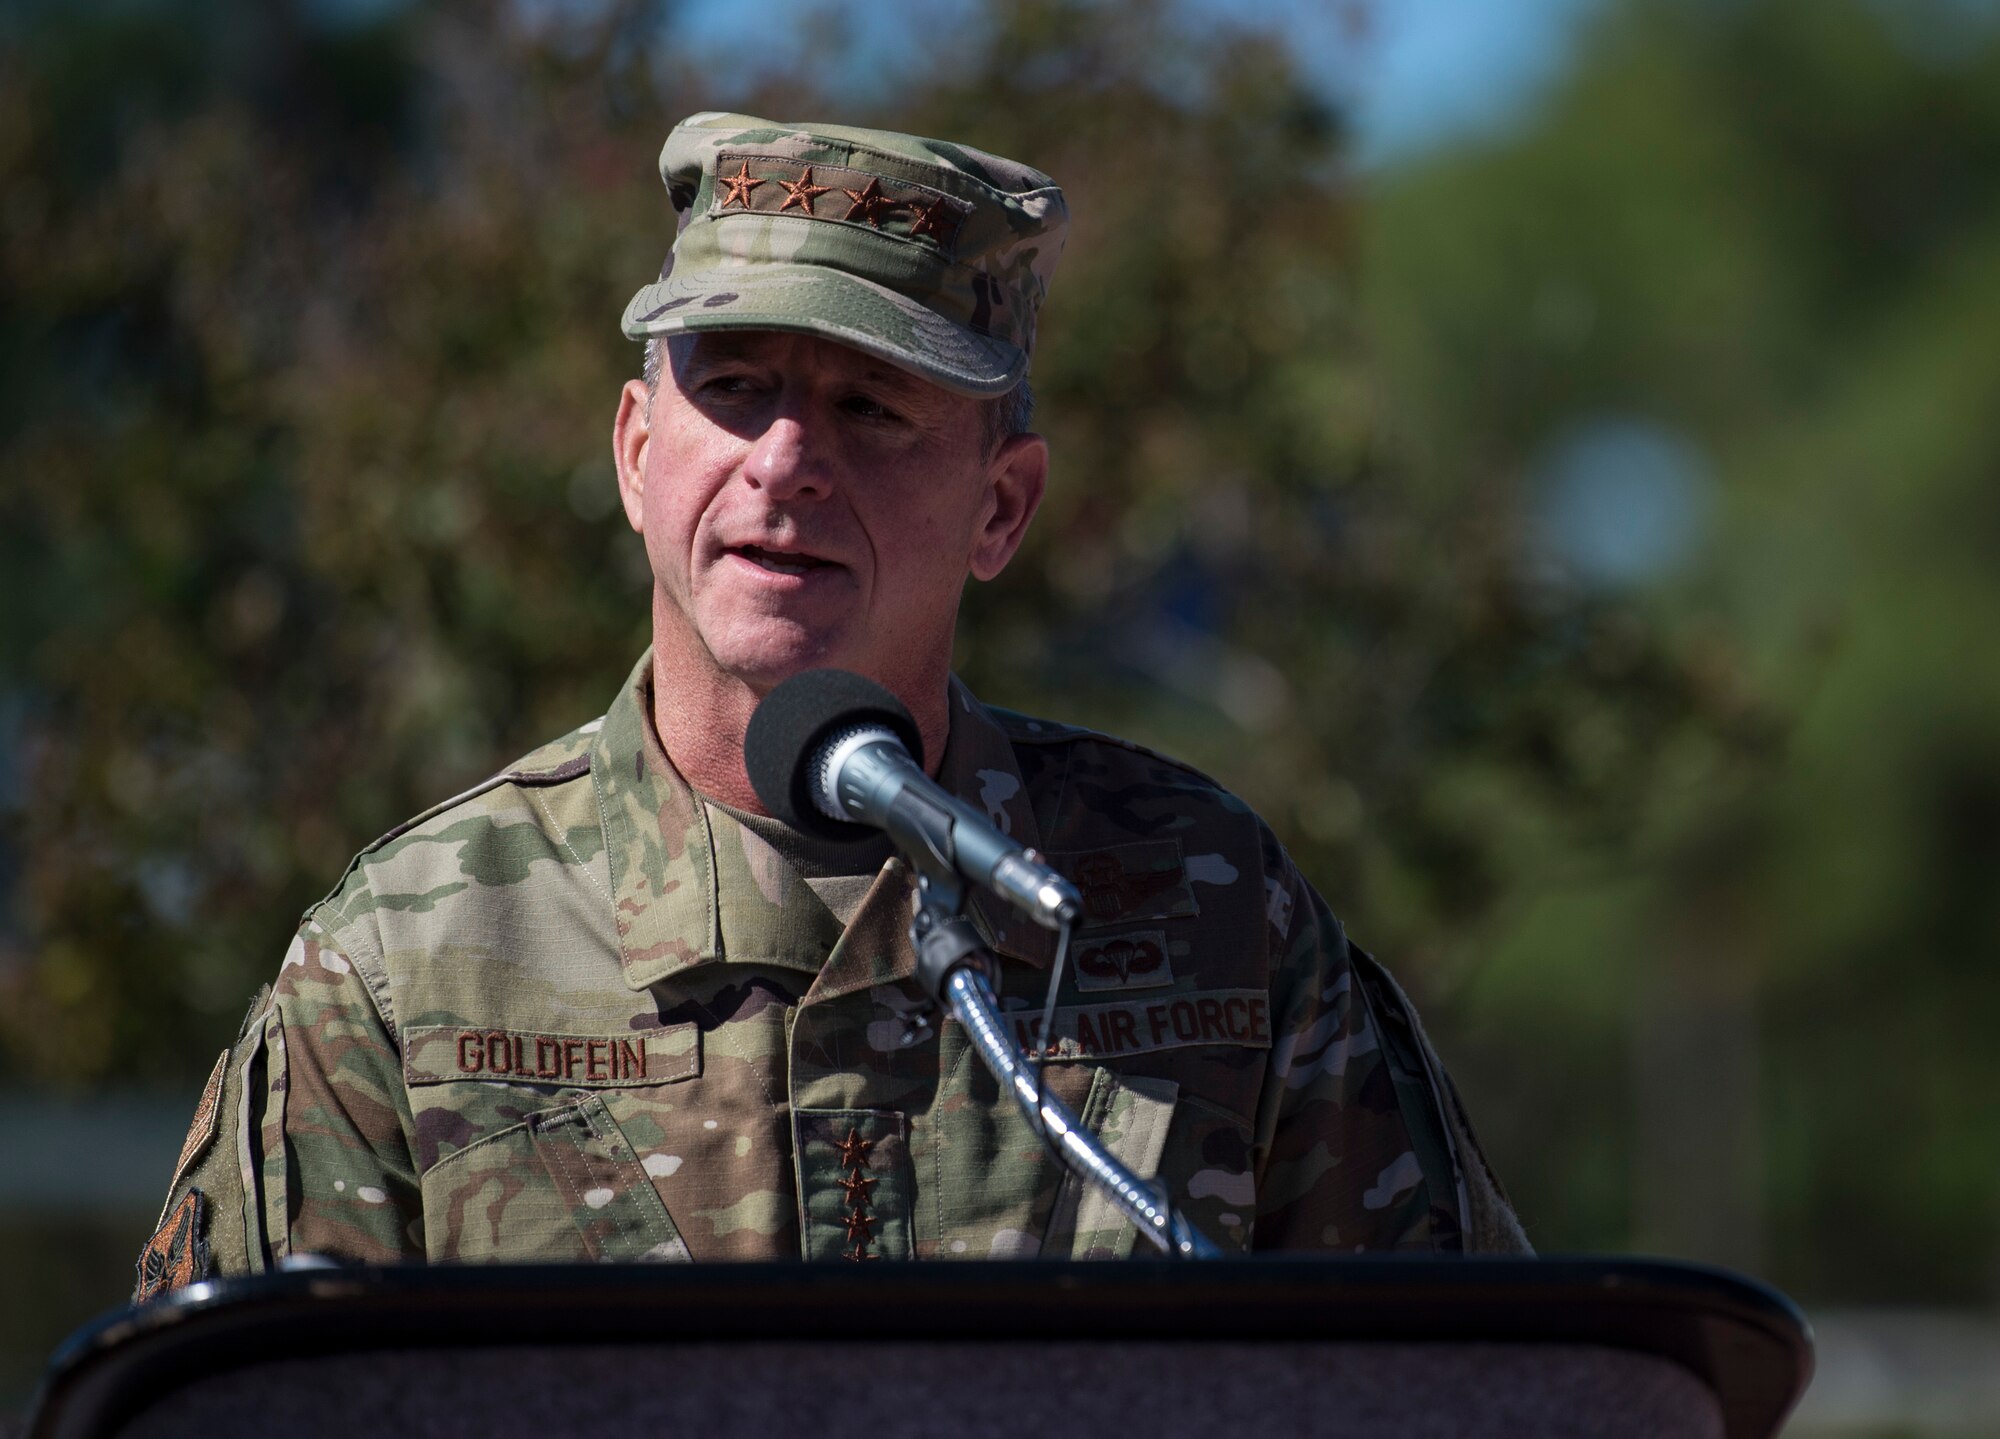 The Chief of Staff of the Air Force, Gen. David Goldfein speaks during the U.S. Air Force Master Sgt. John A. Chapman Medal of Honor memorial unveiling on Oct. 27, 2018, at Hurlburt Field, Florida.